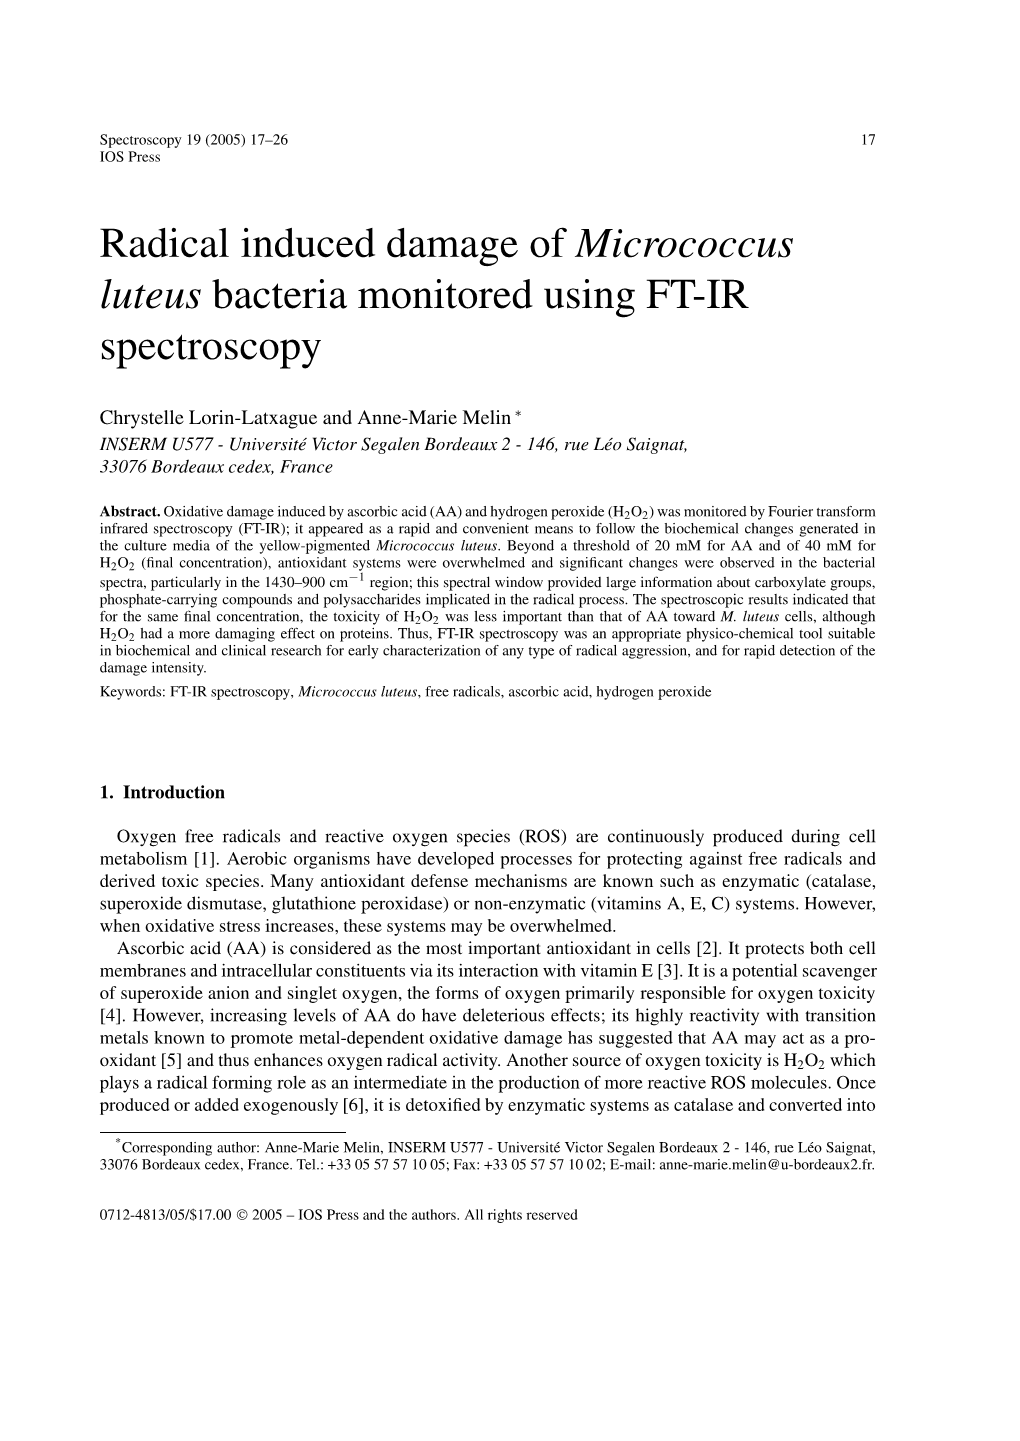 Radical Induced Damage of Micrococcus Luteus Bacteria Monitored Using FT-IR Spectroscopy